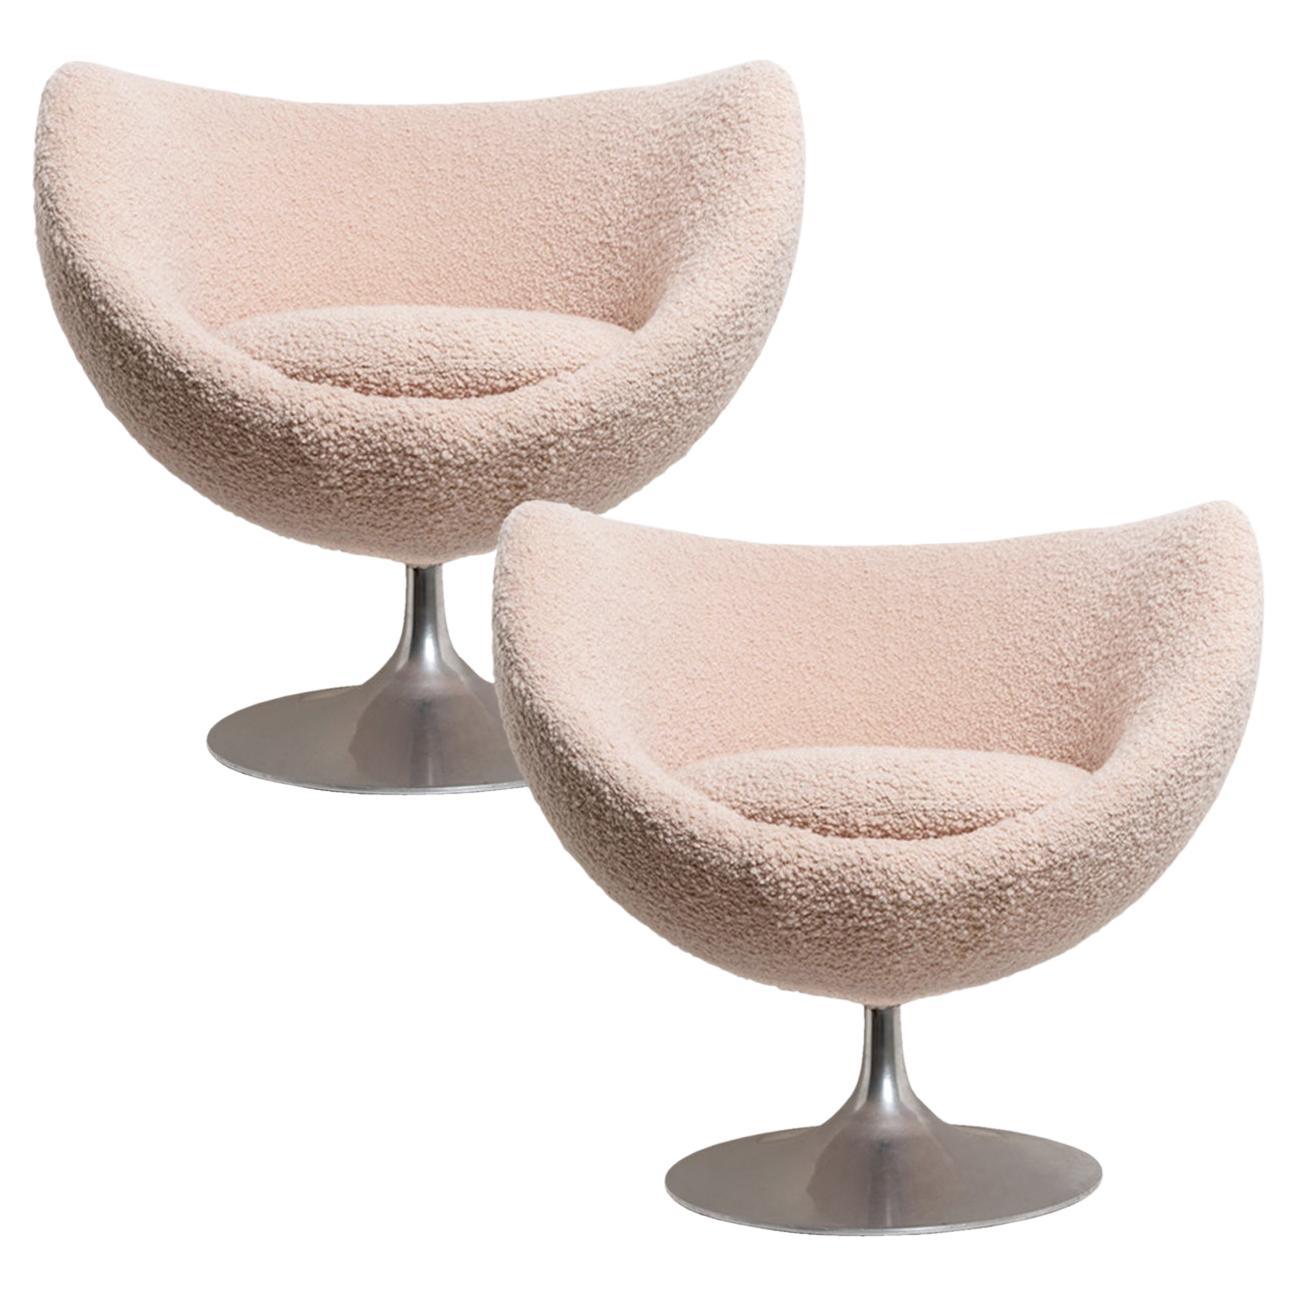 Meurop Crocus Ball Chair, New Upholstered with High-End Fabric by Dedar, Italy For Sale